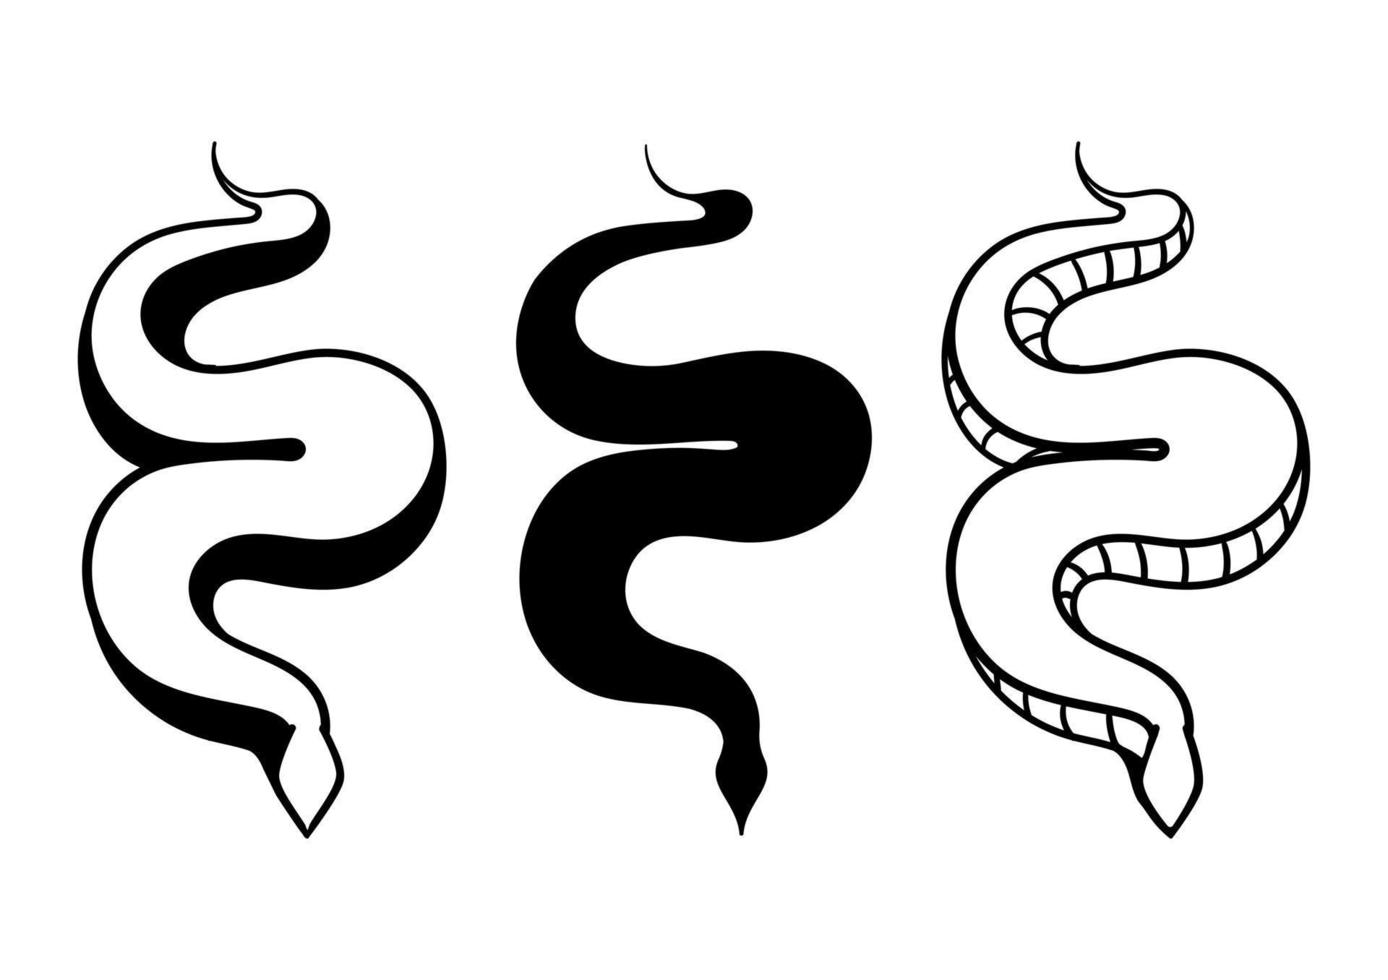 a collection of snake illustrations vector